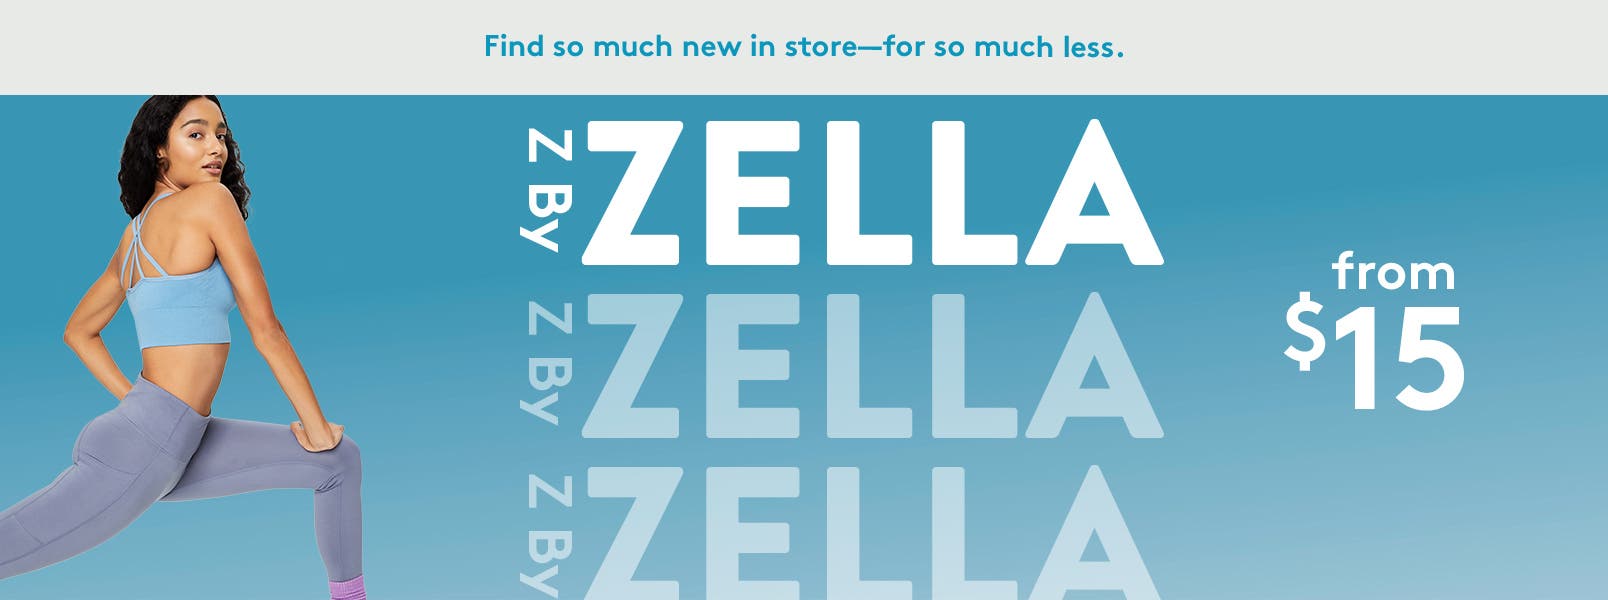 Find so much new in store—for so much less. Z by Zella from $15.